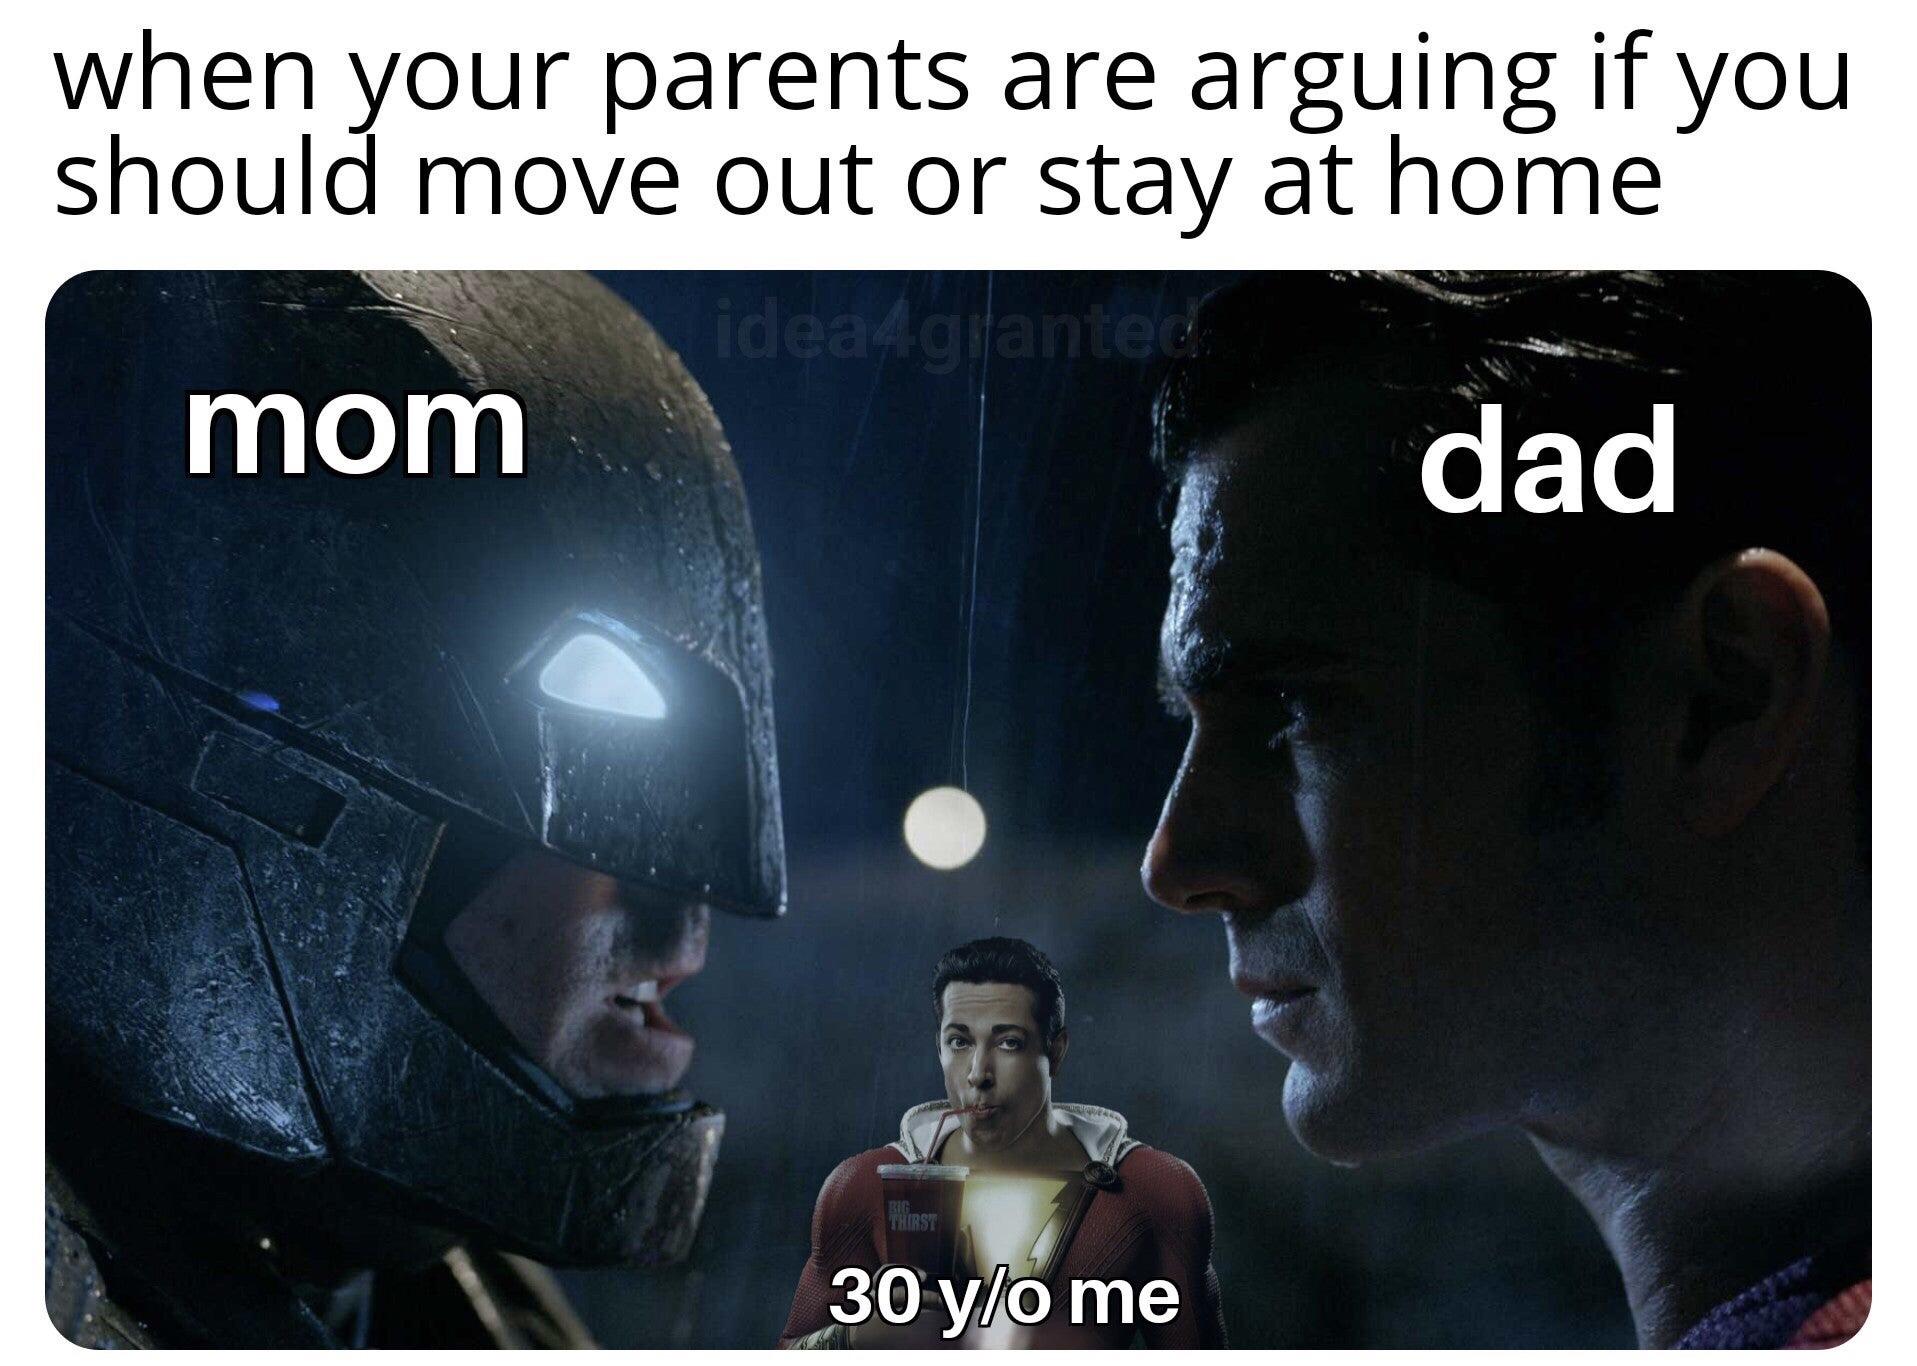 funny gaming memes - Batman v Superman: Dawn of Justice - when your parents are arguing if you should move out or stay at home ideaAgilanted mom dad 30 yo me